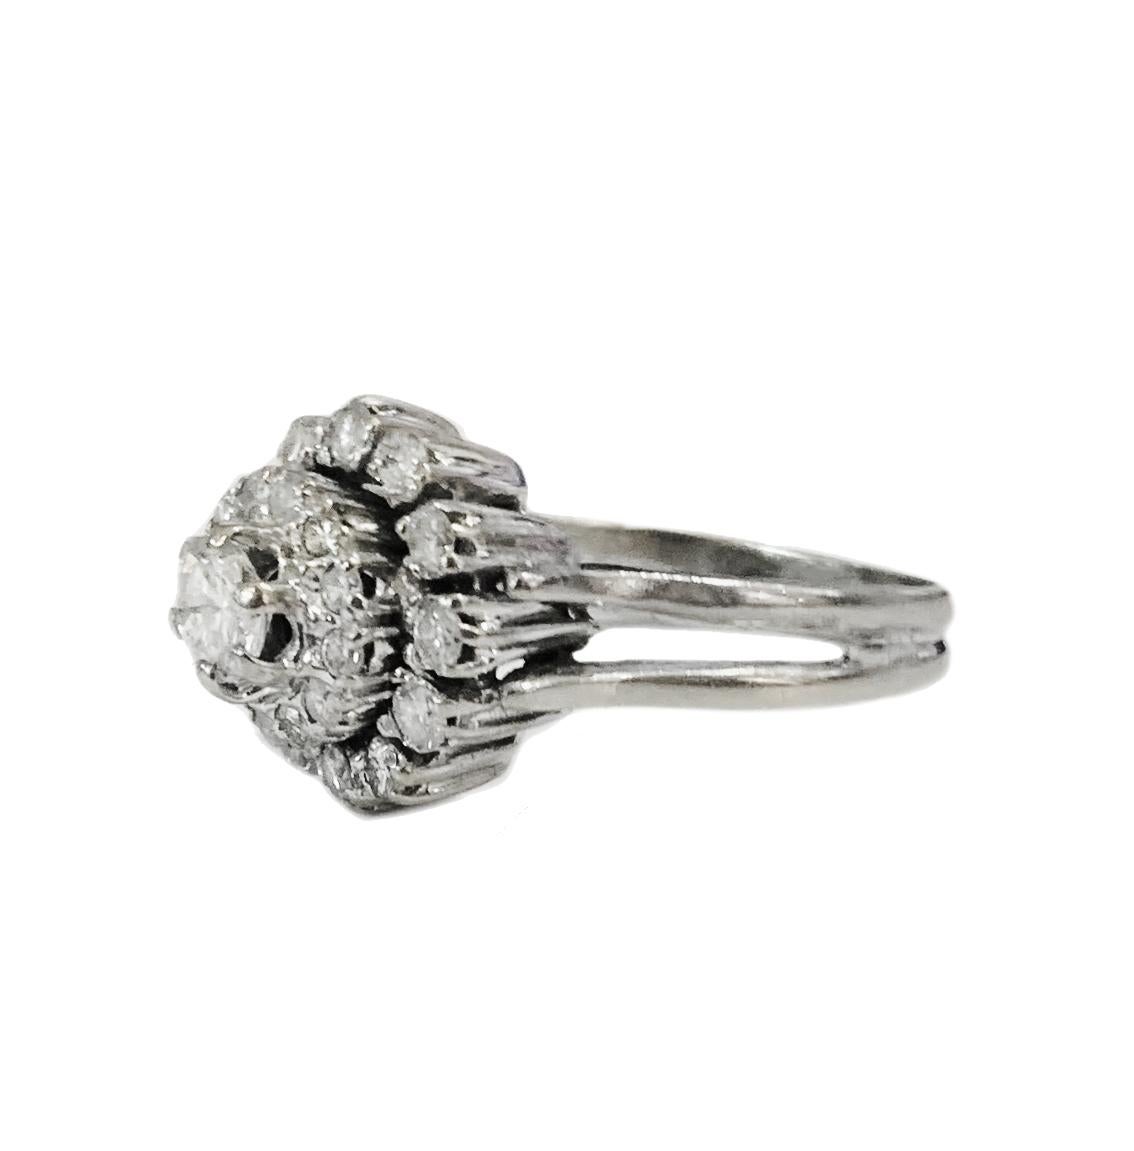 -14k White Gold
-Ring size: 6.75
-Diamonds: 1.2ct
-VS clarity, G color
-Flower dimension: 12.5x12.5mm